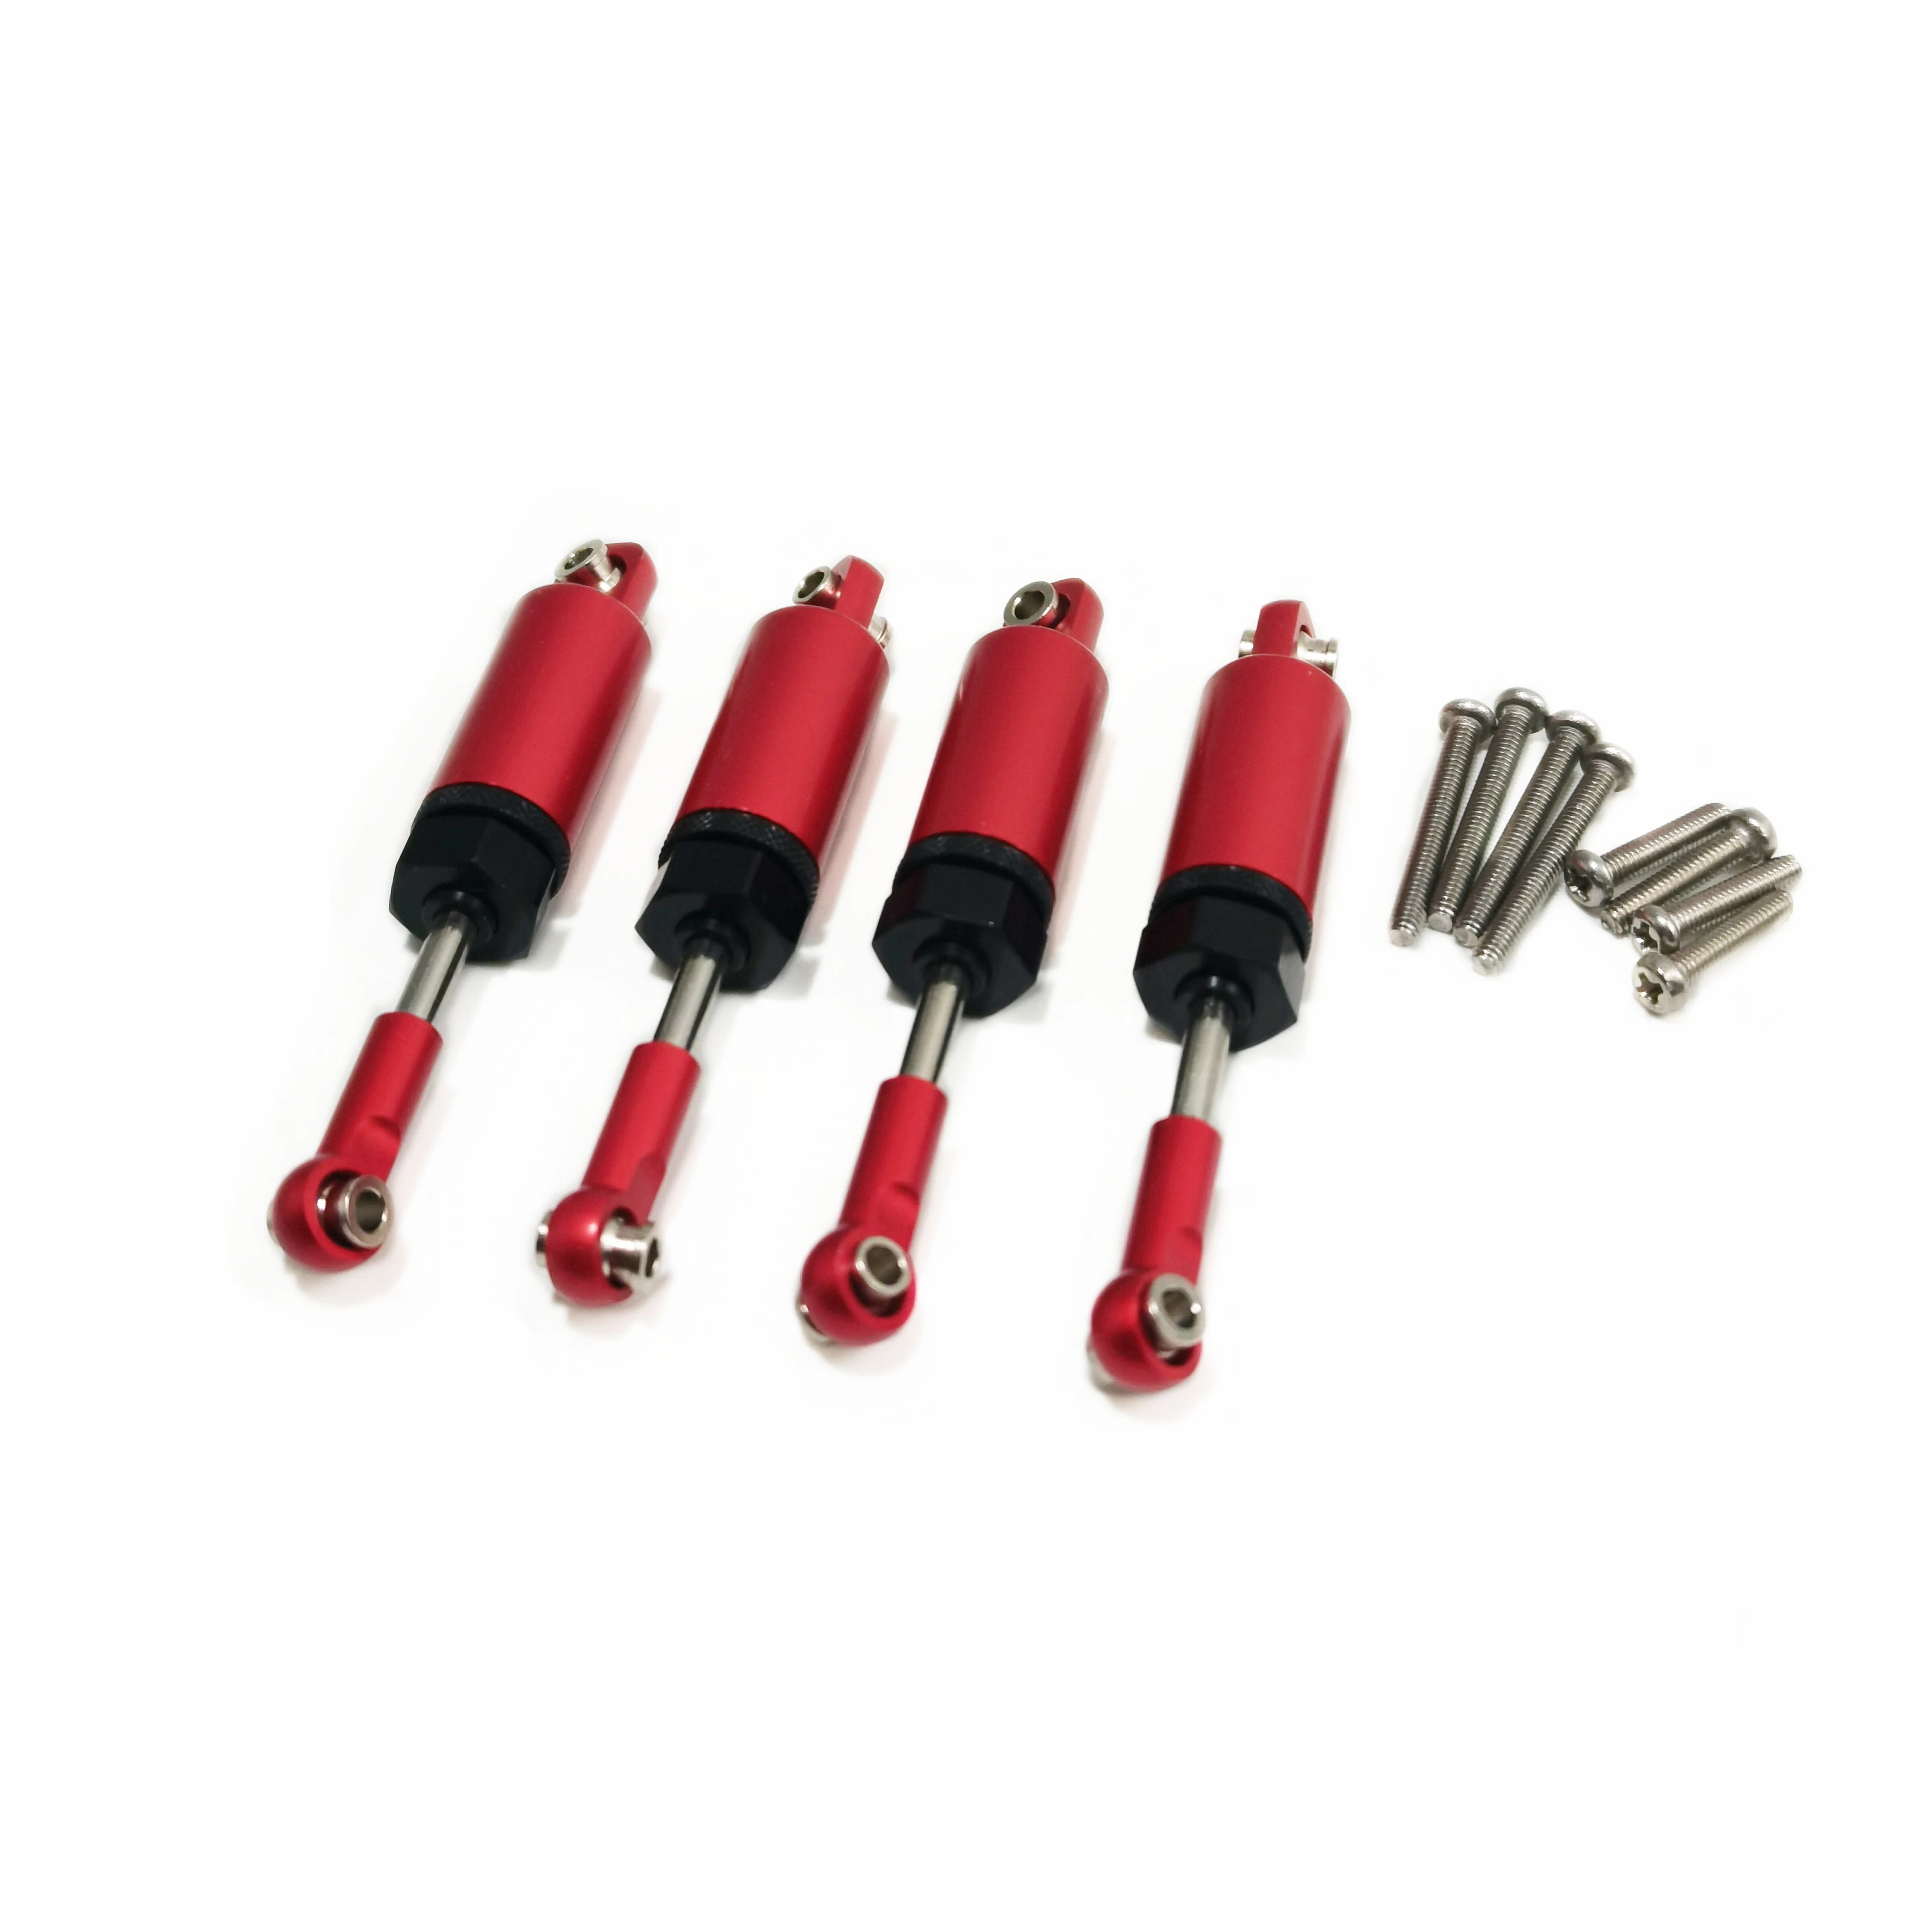 Mn99s mn98 mn90 wpl c14 c24 c34 rc car 4pcs oil typed shock absorber set accessories thumb200